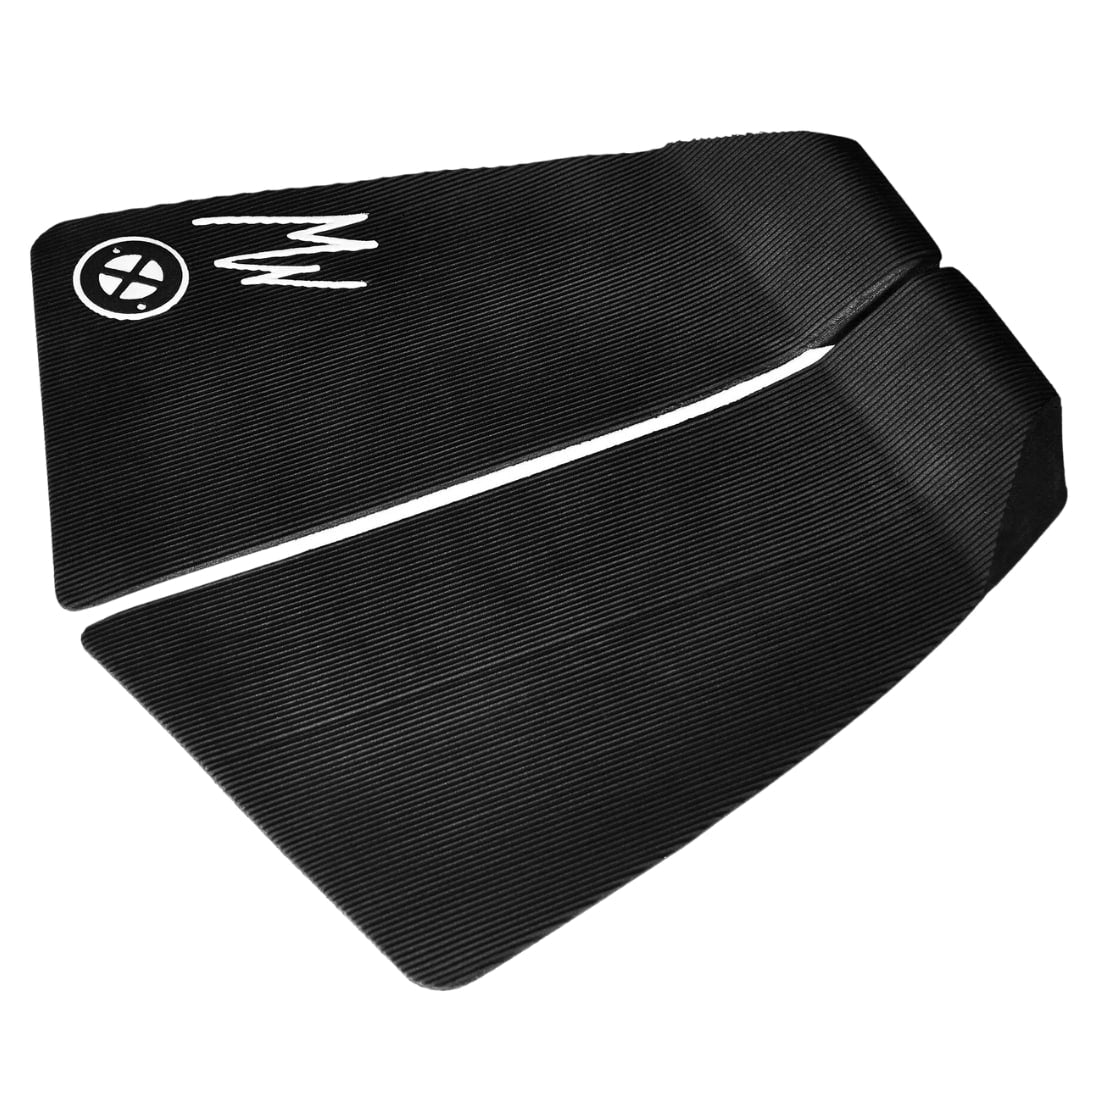 Dreded Mikey Wright Signature Tail Pad - Black - 2 Piece Tail Pad by Dreded